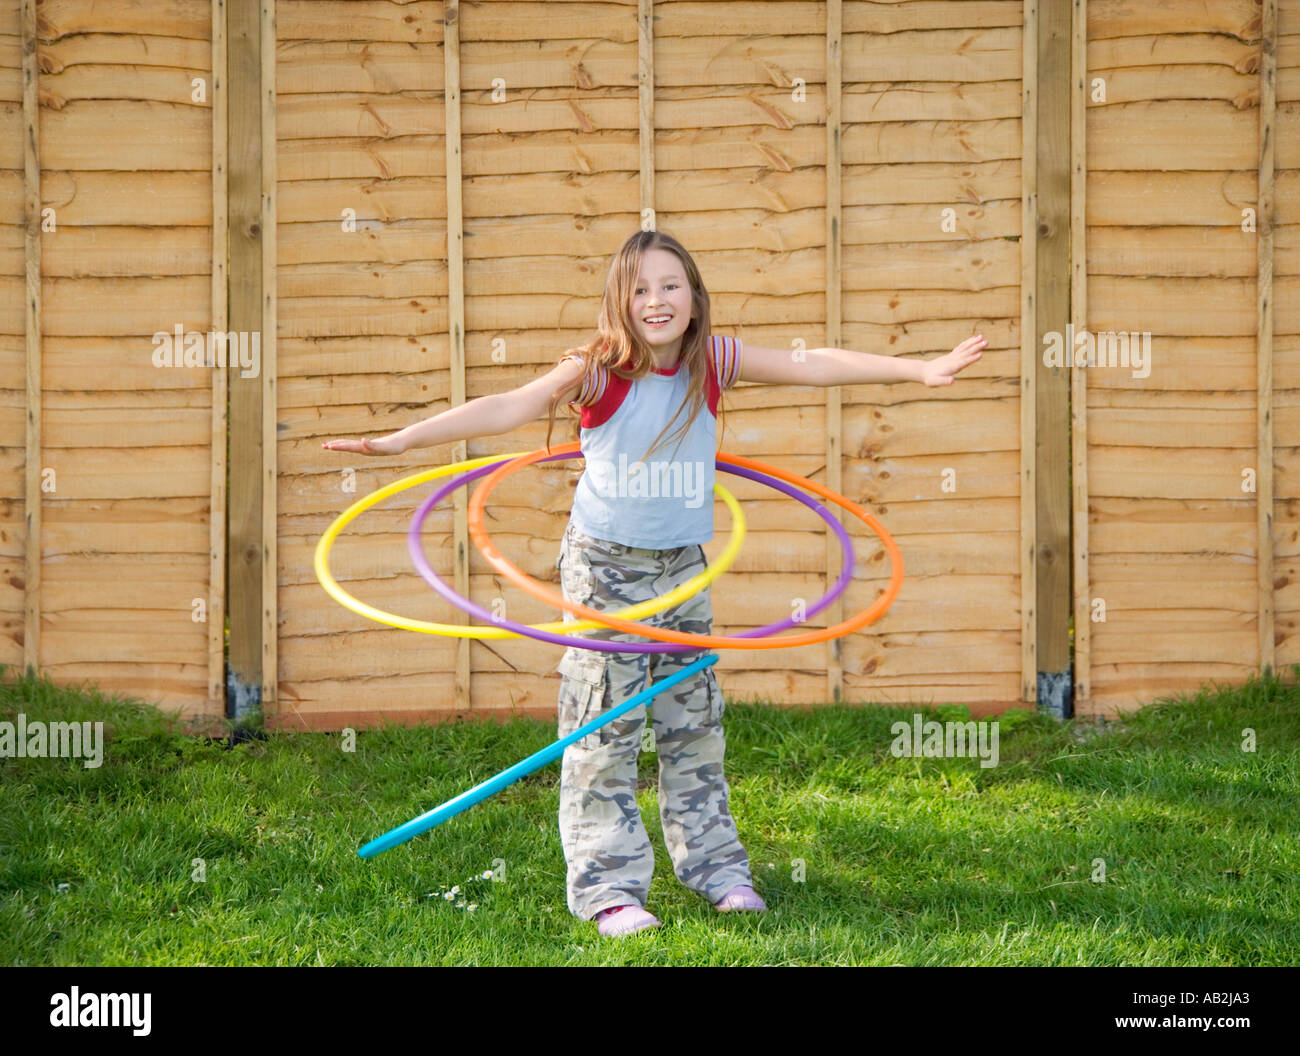 Girl playing with four plastic hula hoops Stock Photo